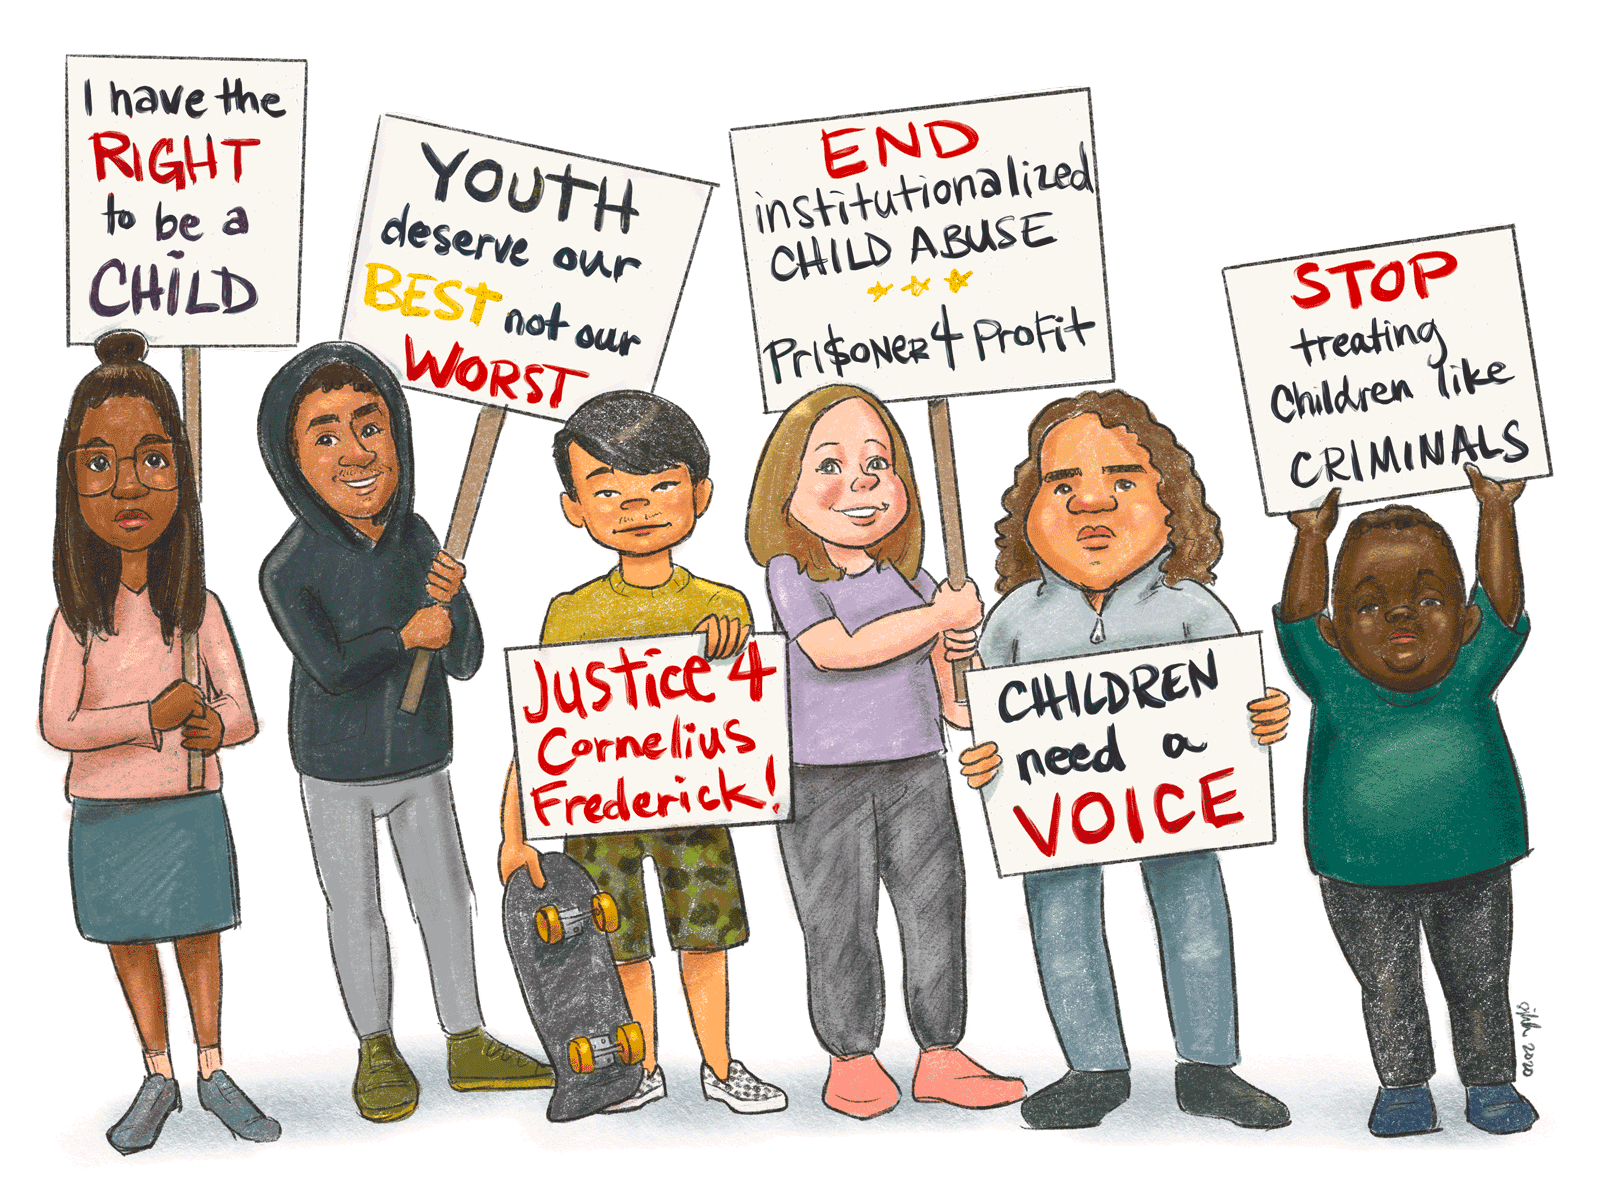 Illustration of 6 diverse kids holding signs that say "I have the right to be a child" and "youth deserve our best not our worst" and "children need a voice" "stop treating children like criminals" "end institutional child abuse" "justice for Cornelius Frederick"